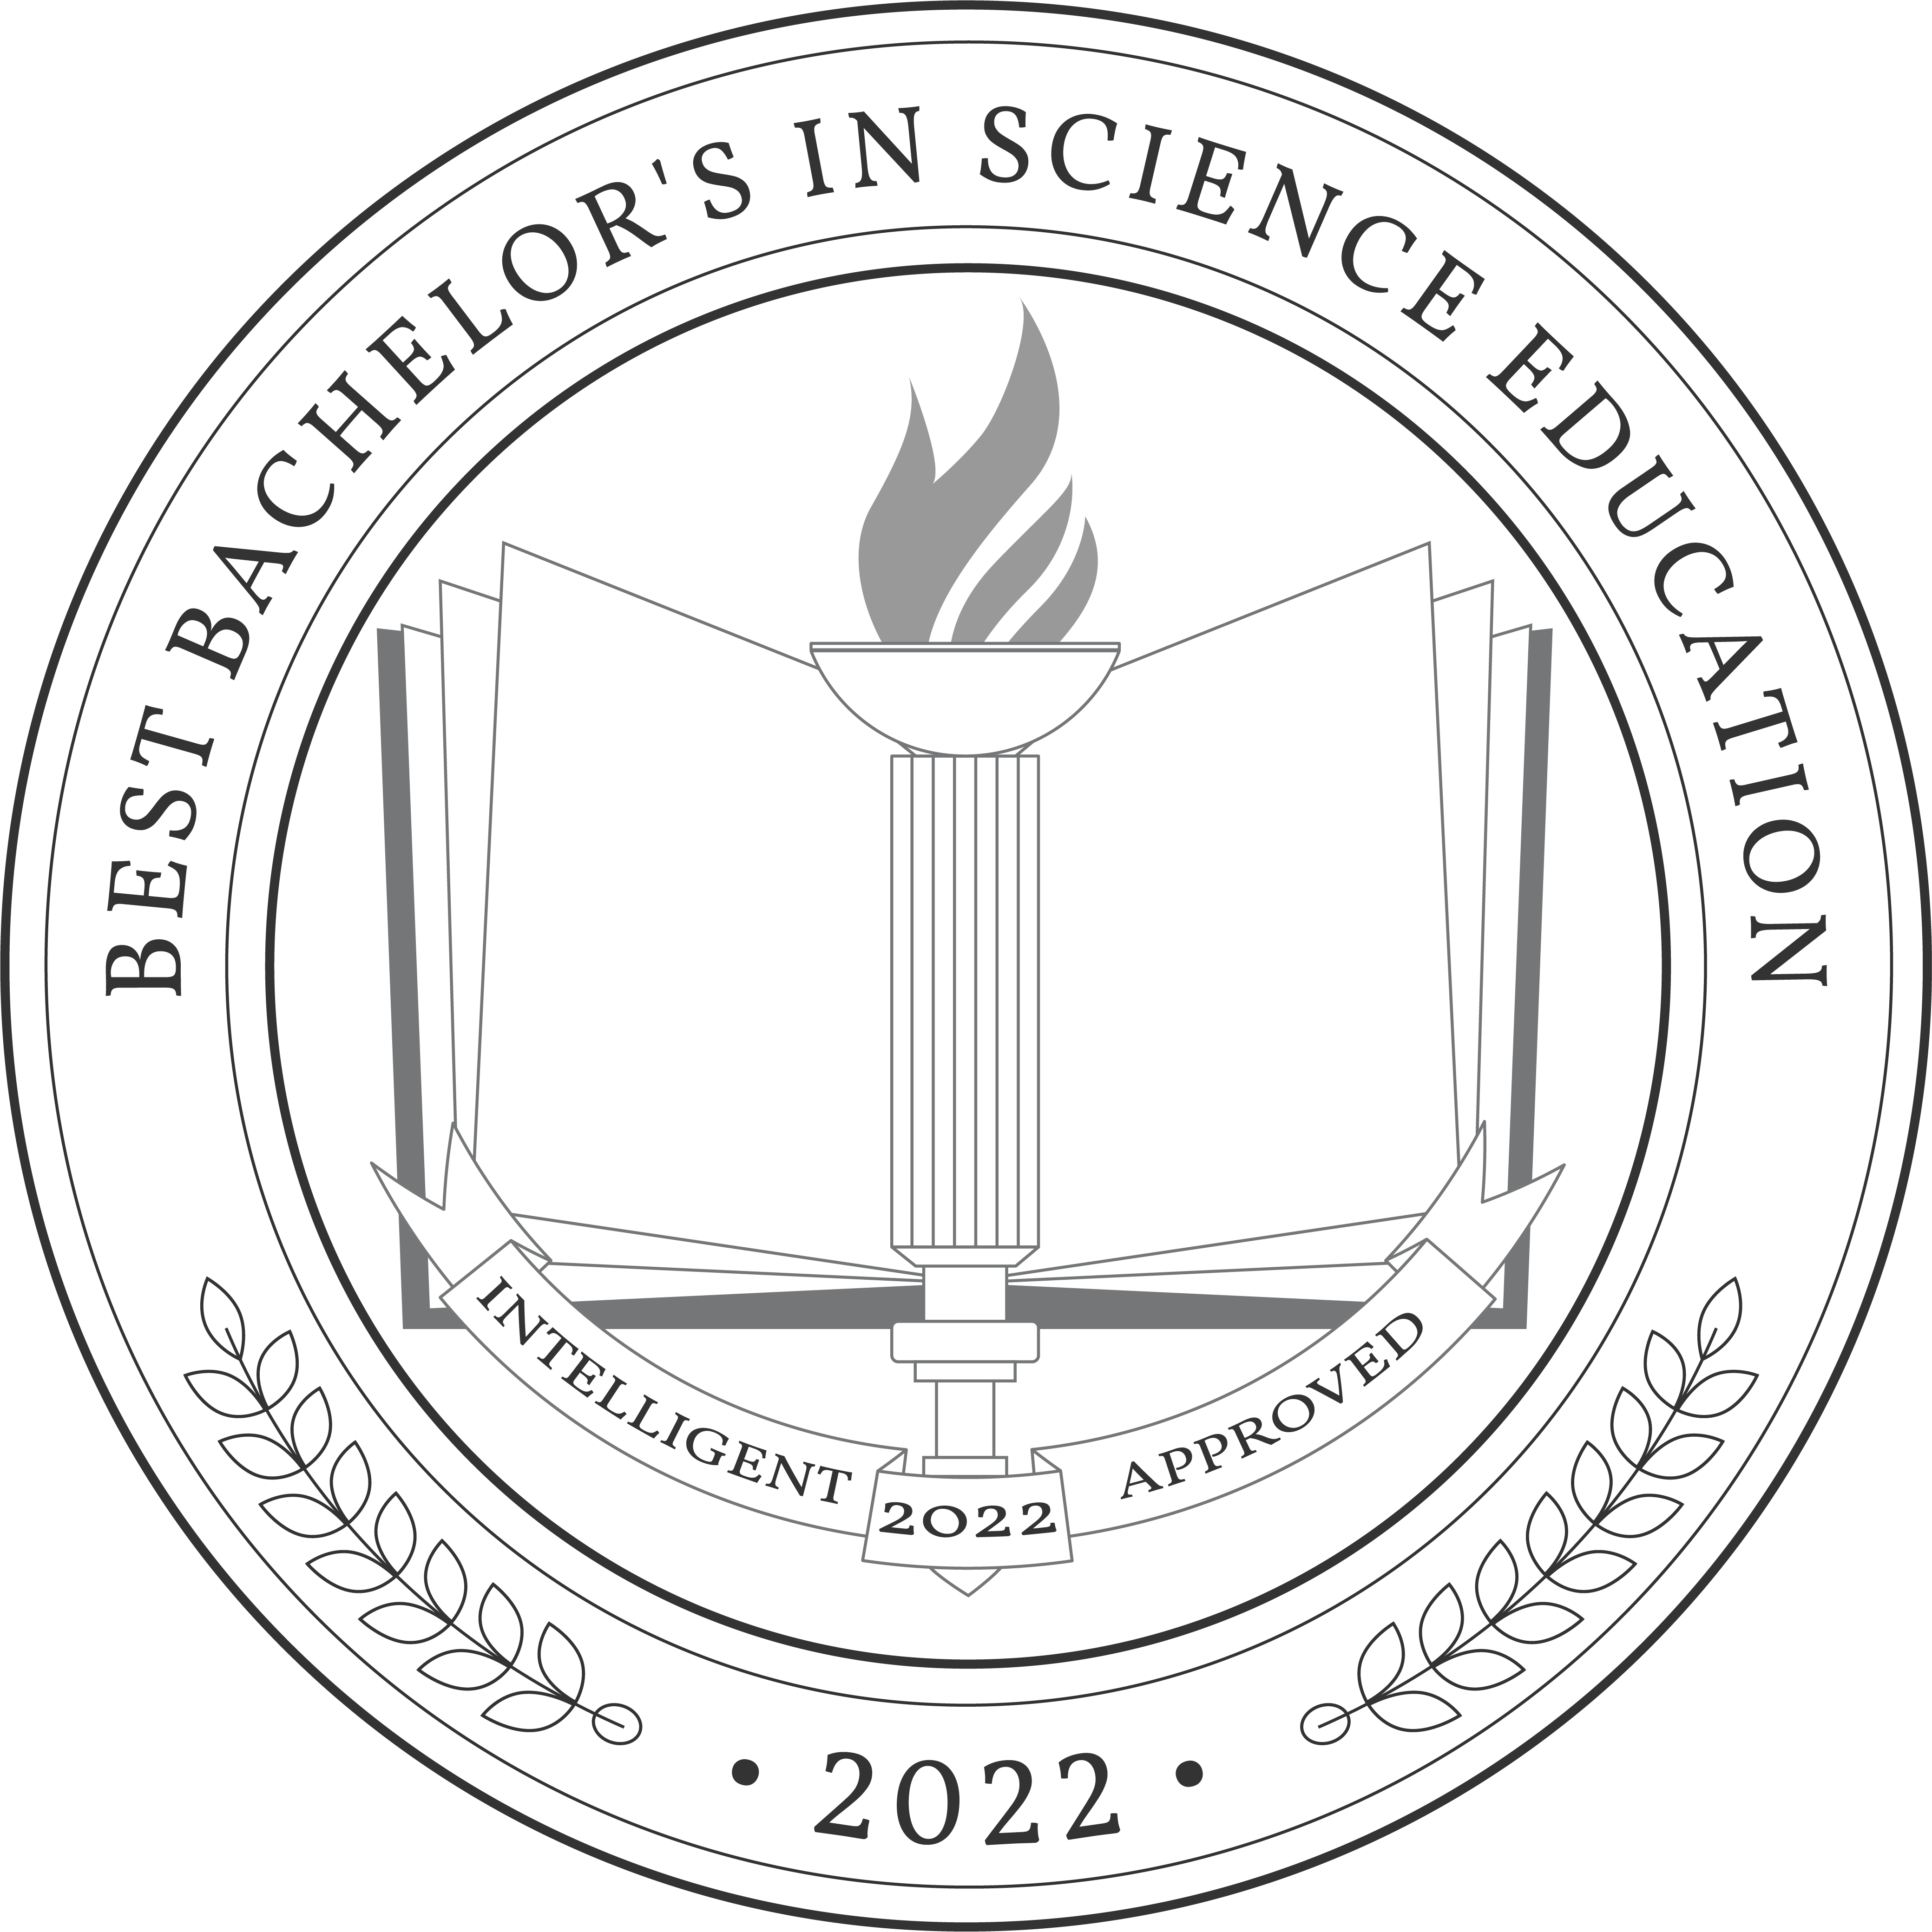 Best Bachelor's in Science Education Badge